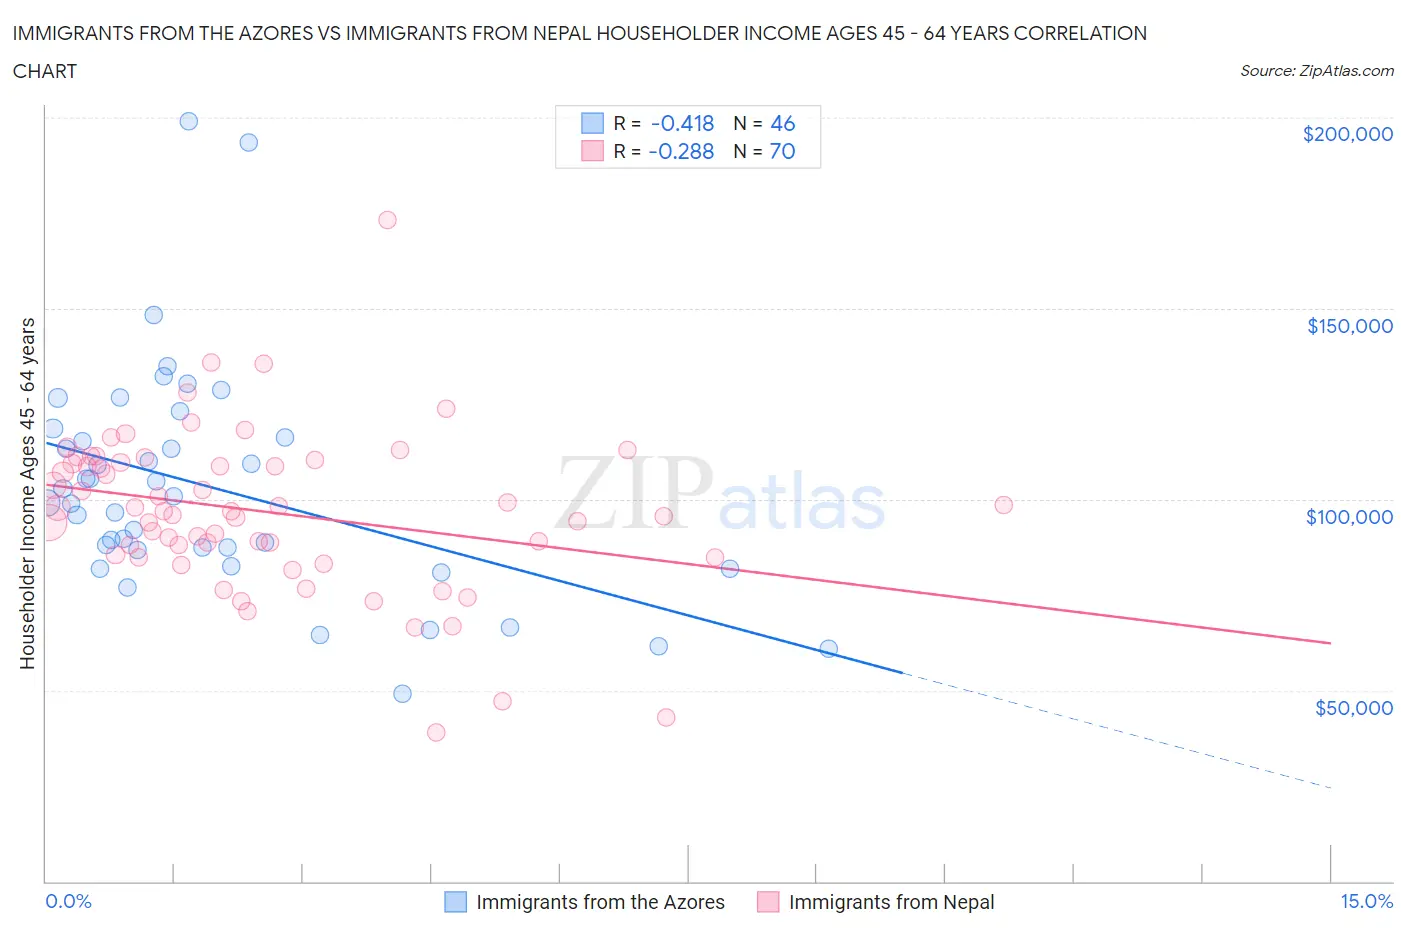 Immigrants from the Azores vs Immigrants from Nepal Householder Income Ages 45 - 64 years